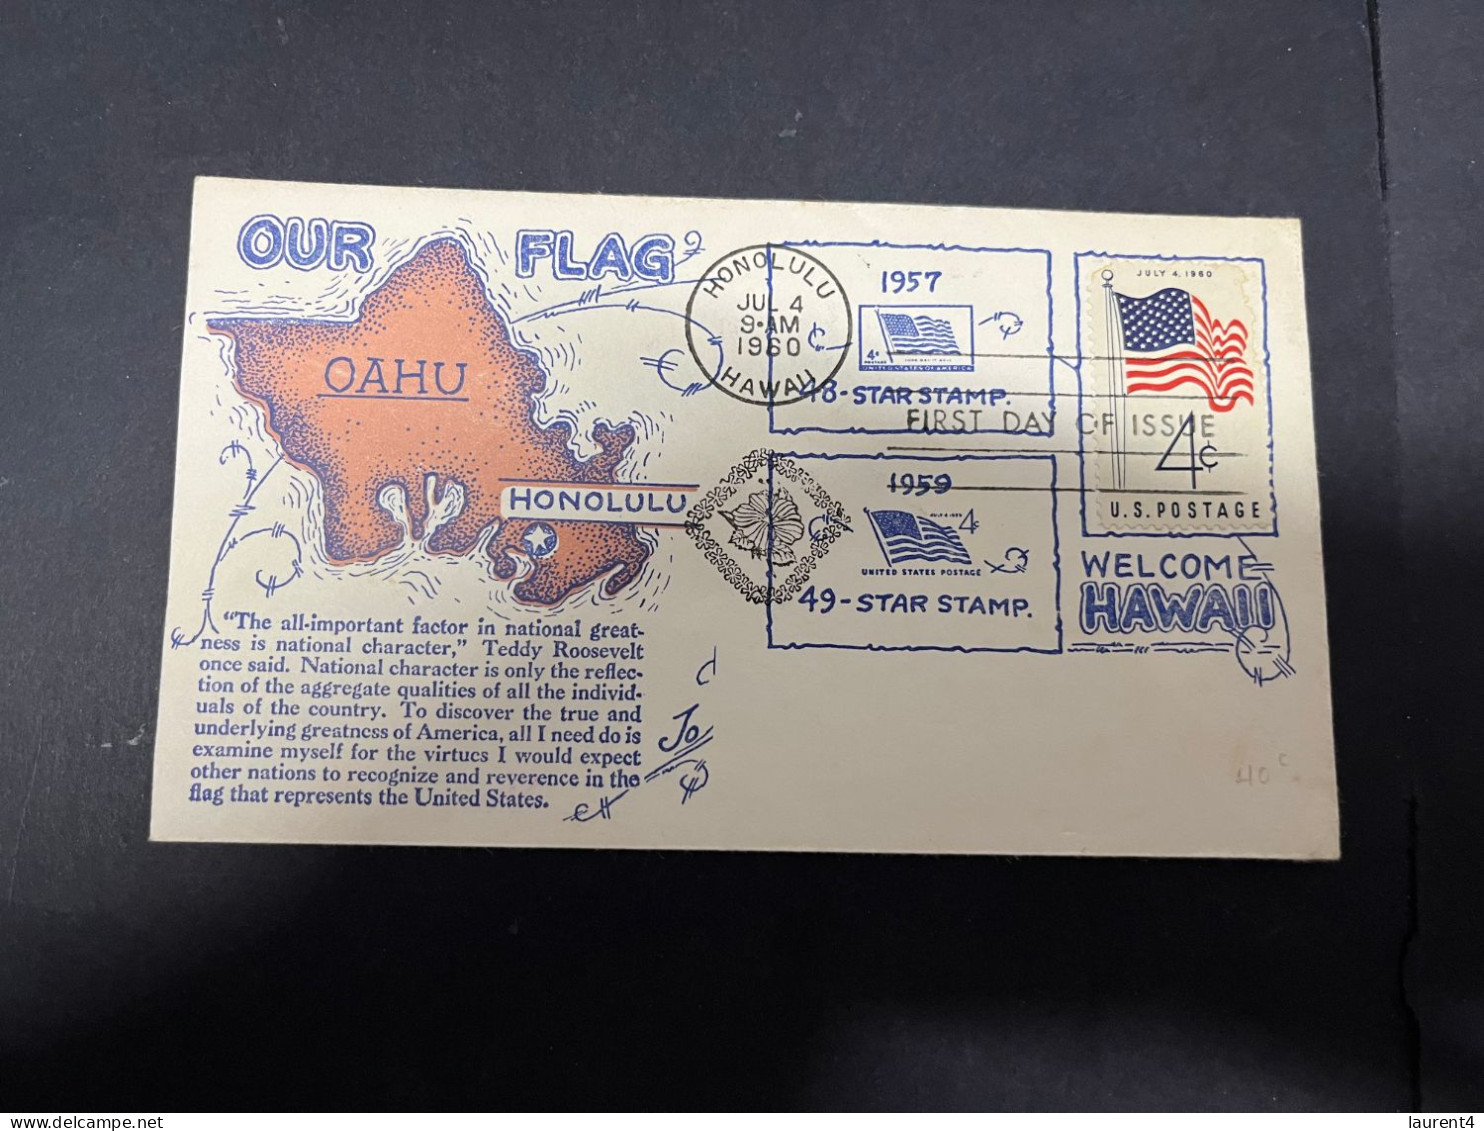 19-5-2024 (5 Z 34) USA 4 Cents Stamp FDC - 1960 - Our Flag - Oahu Honoluluu - Enveloppes